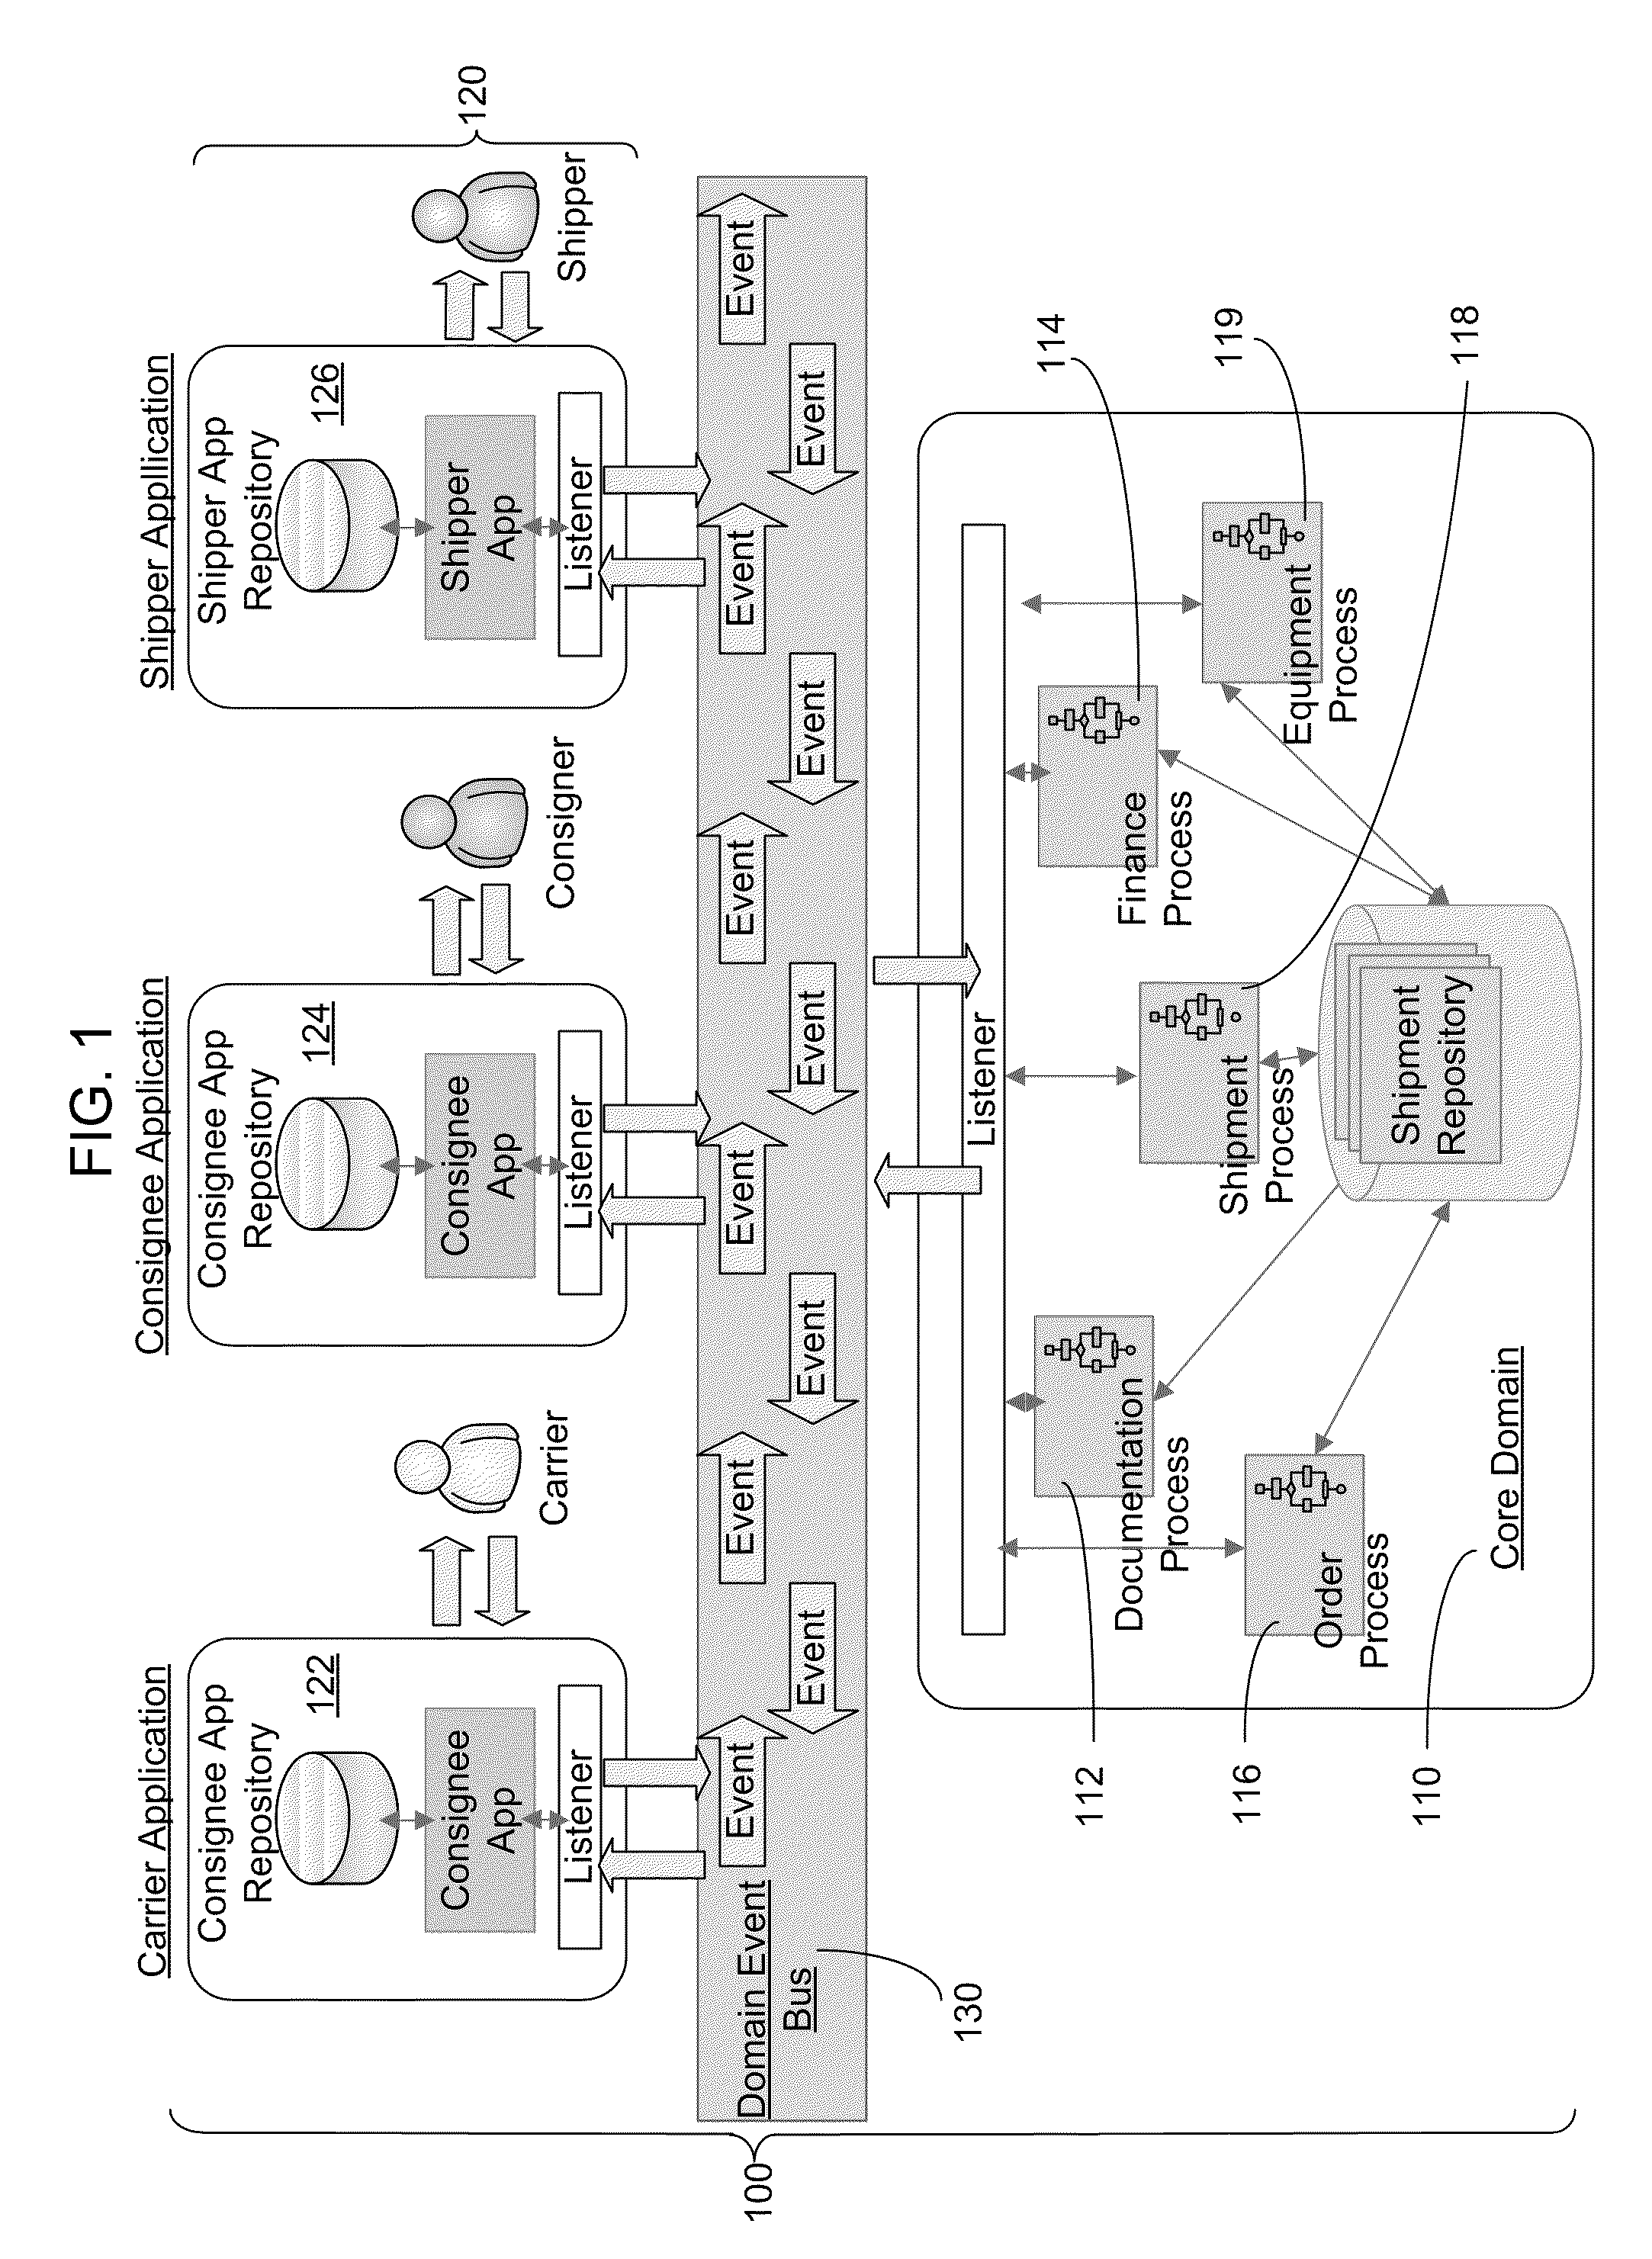 Shipment Management Systems and Methods